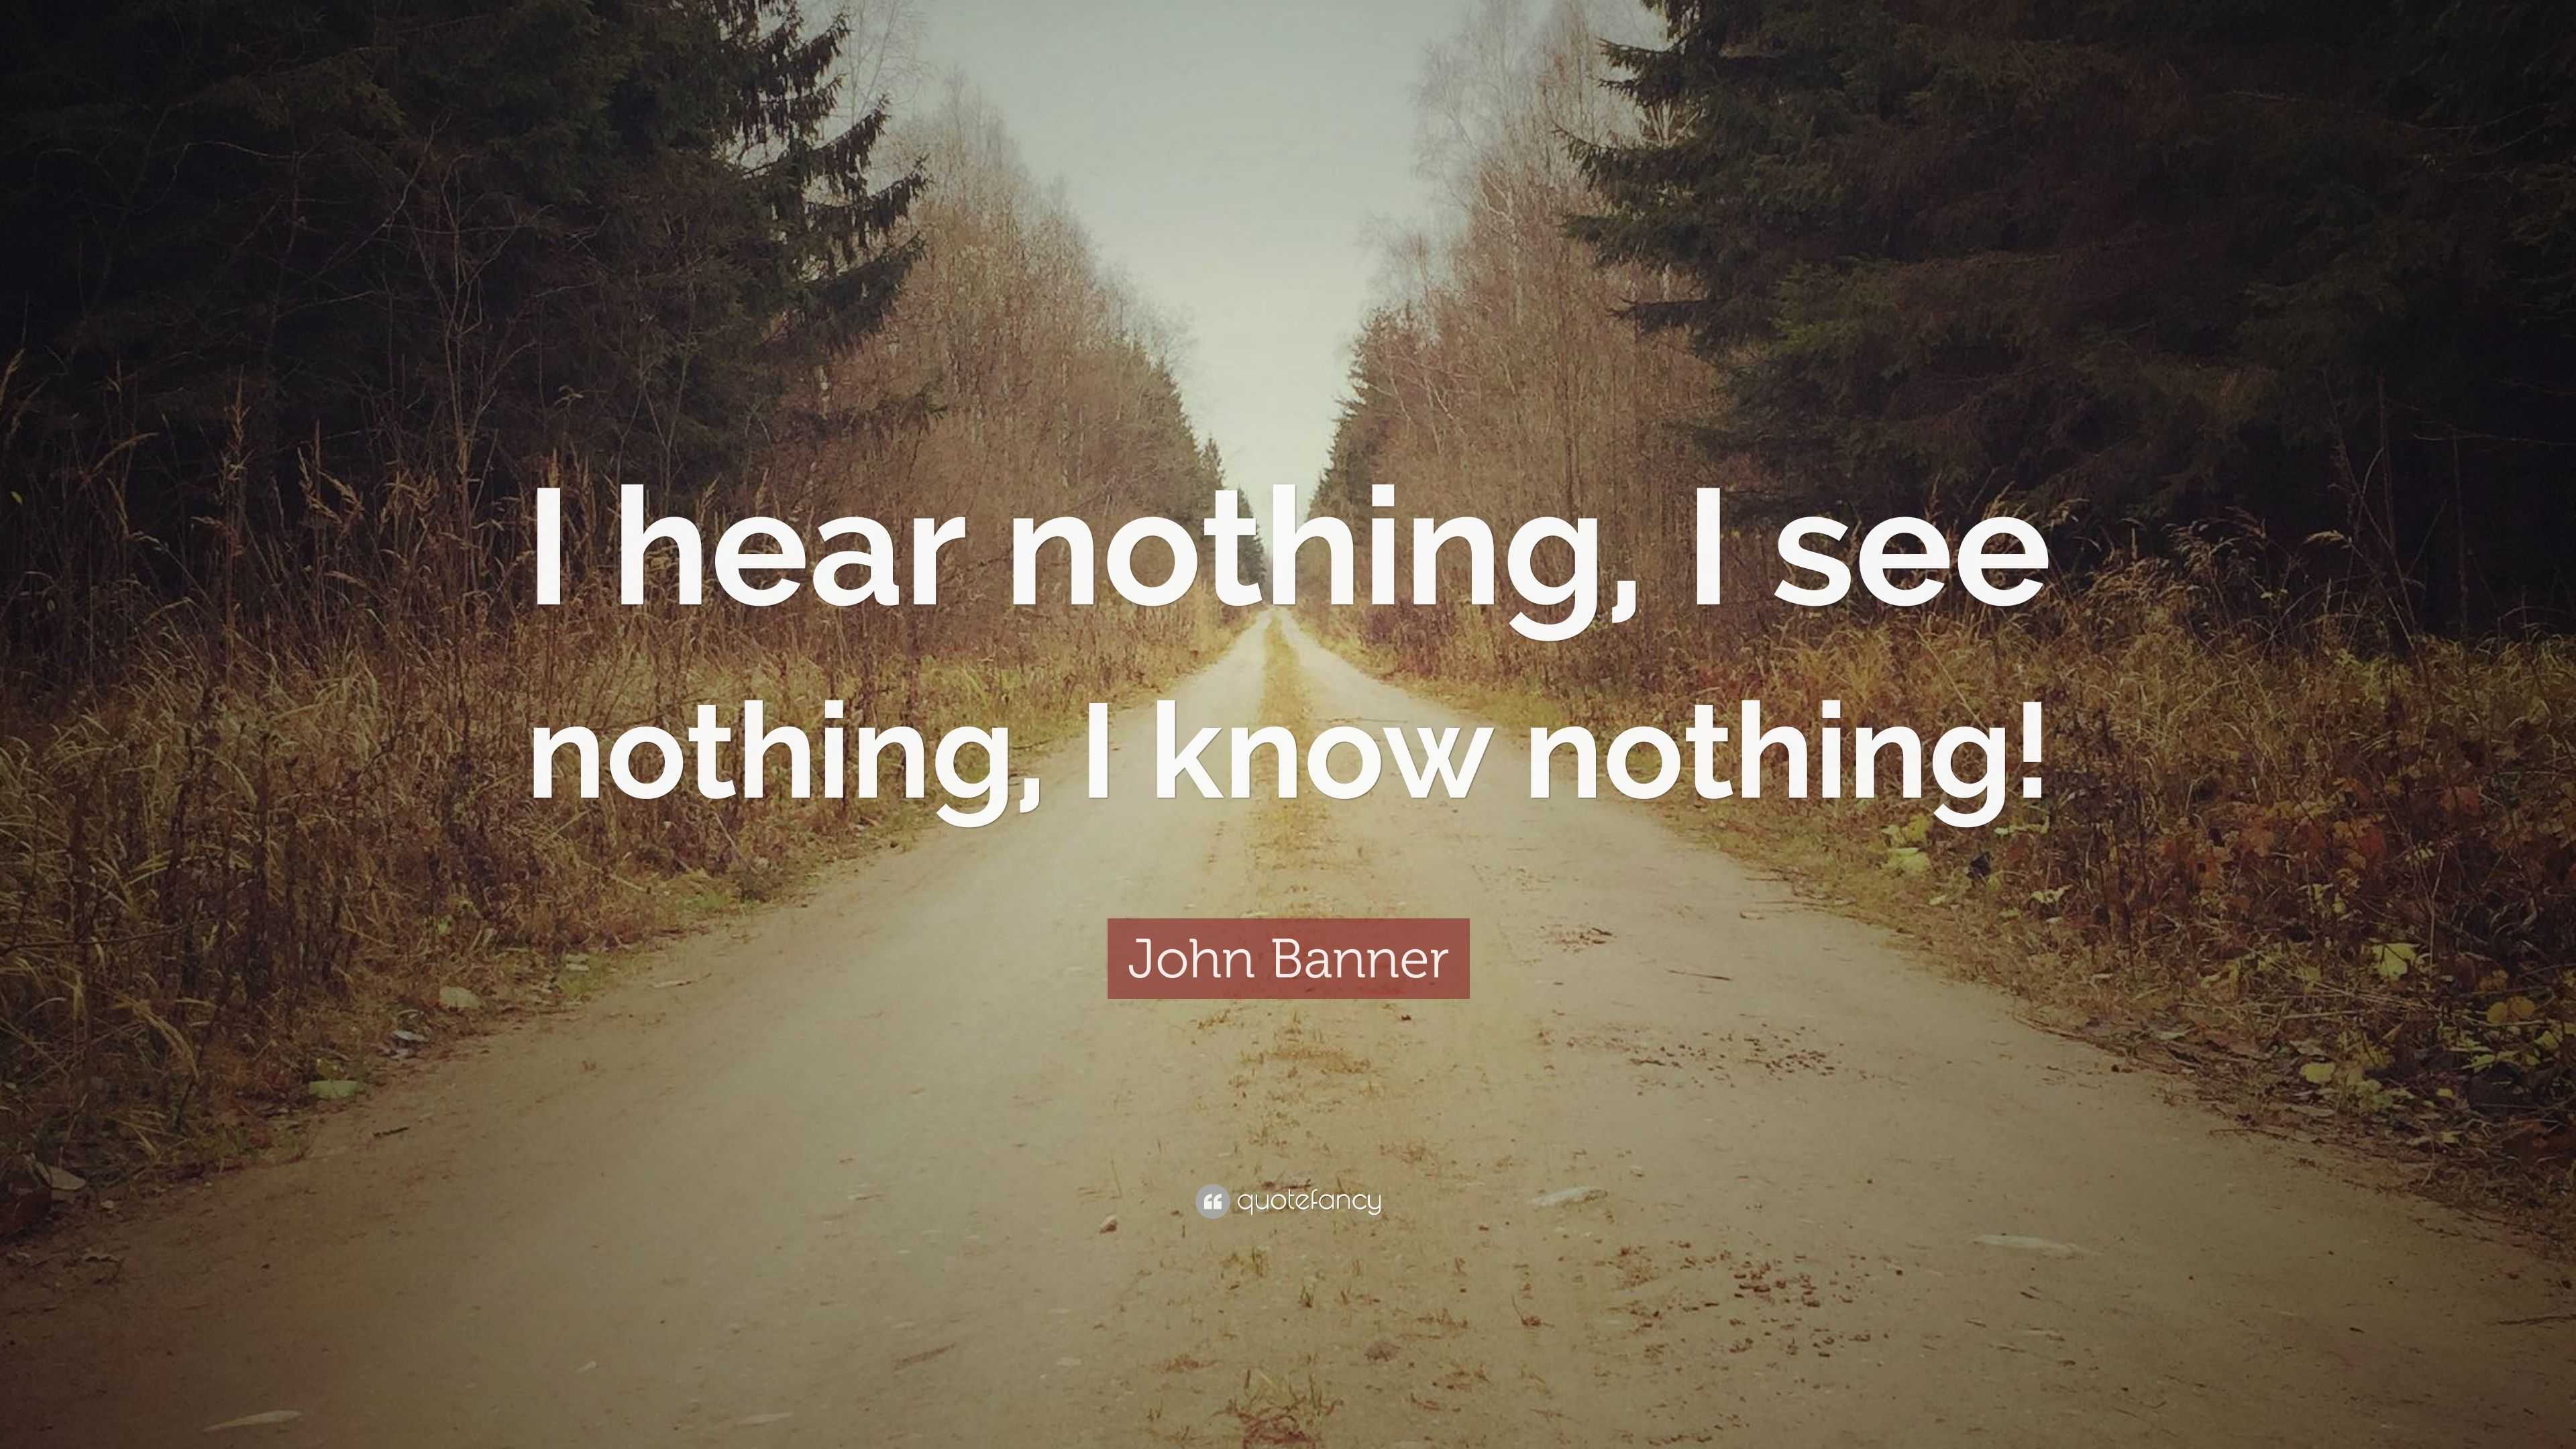 John Banner Quote “I hear nothing, I see nothing, I know nothing!”